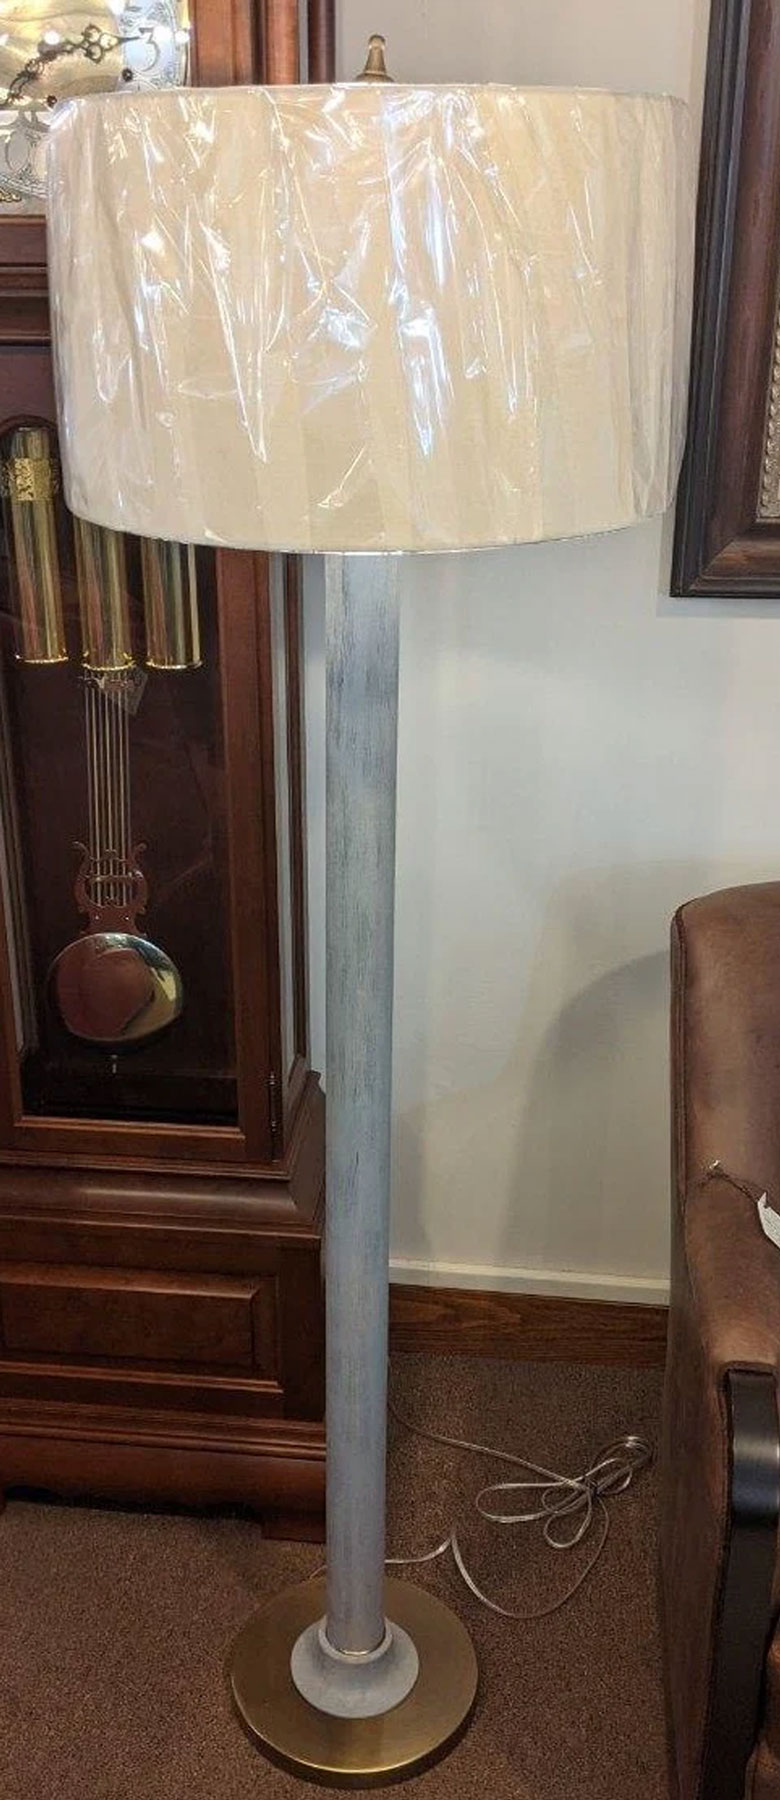 Natural Light Dorset Floor Lamp in Weathered Gray Finish